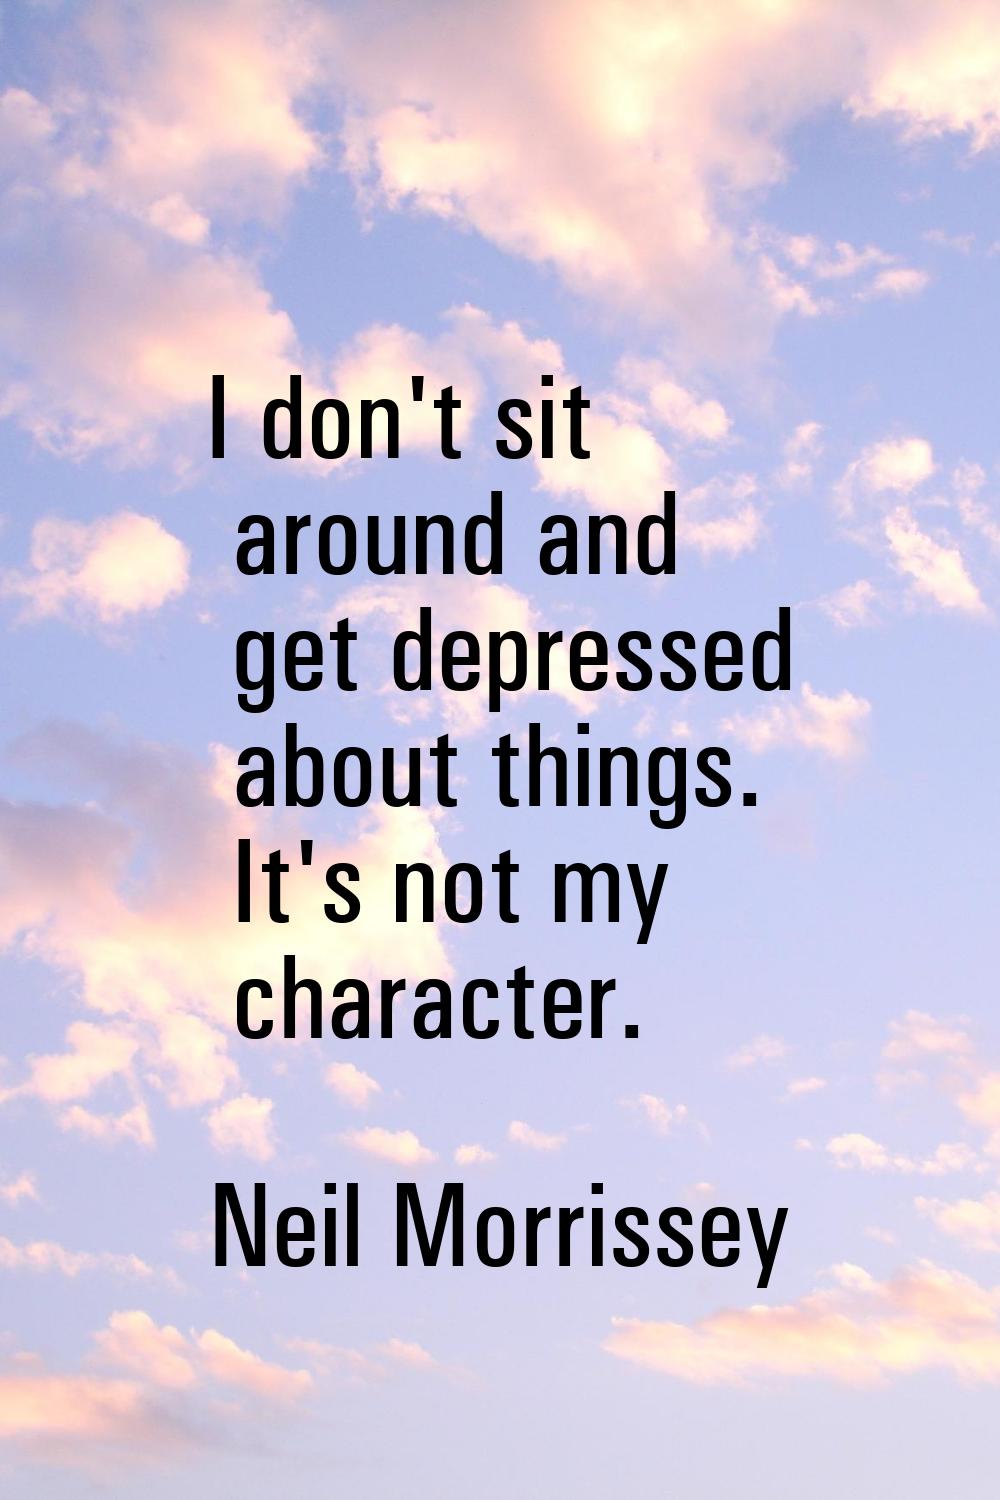 I don't sit around and get depressed about things. It's not my character.